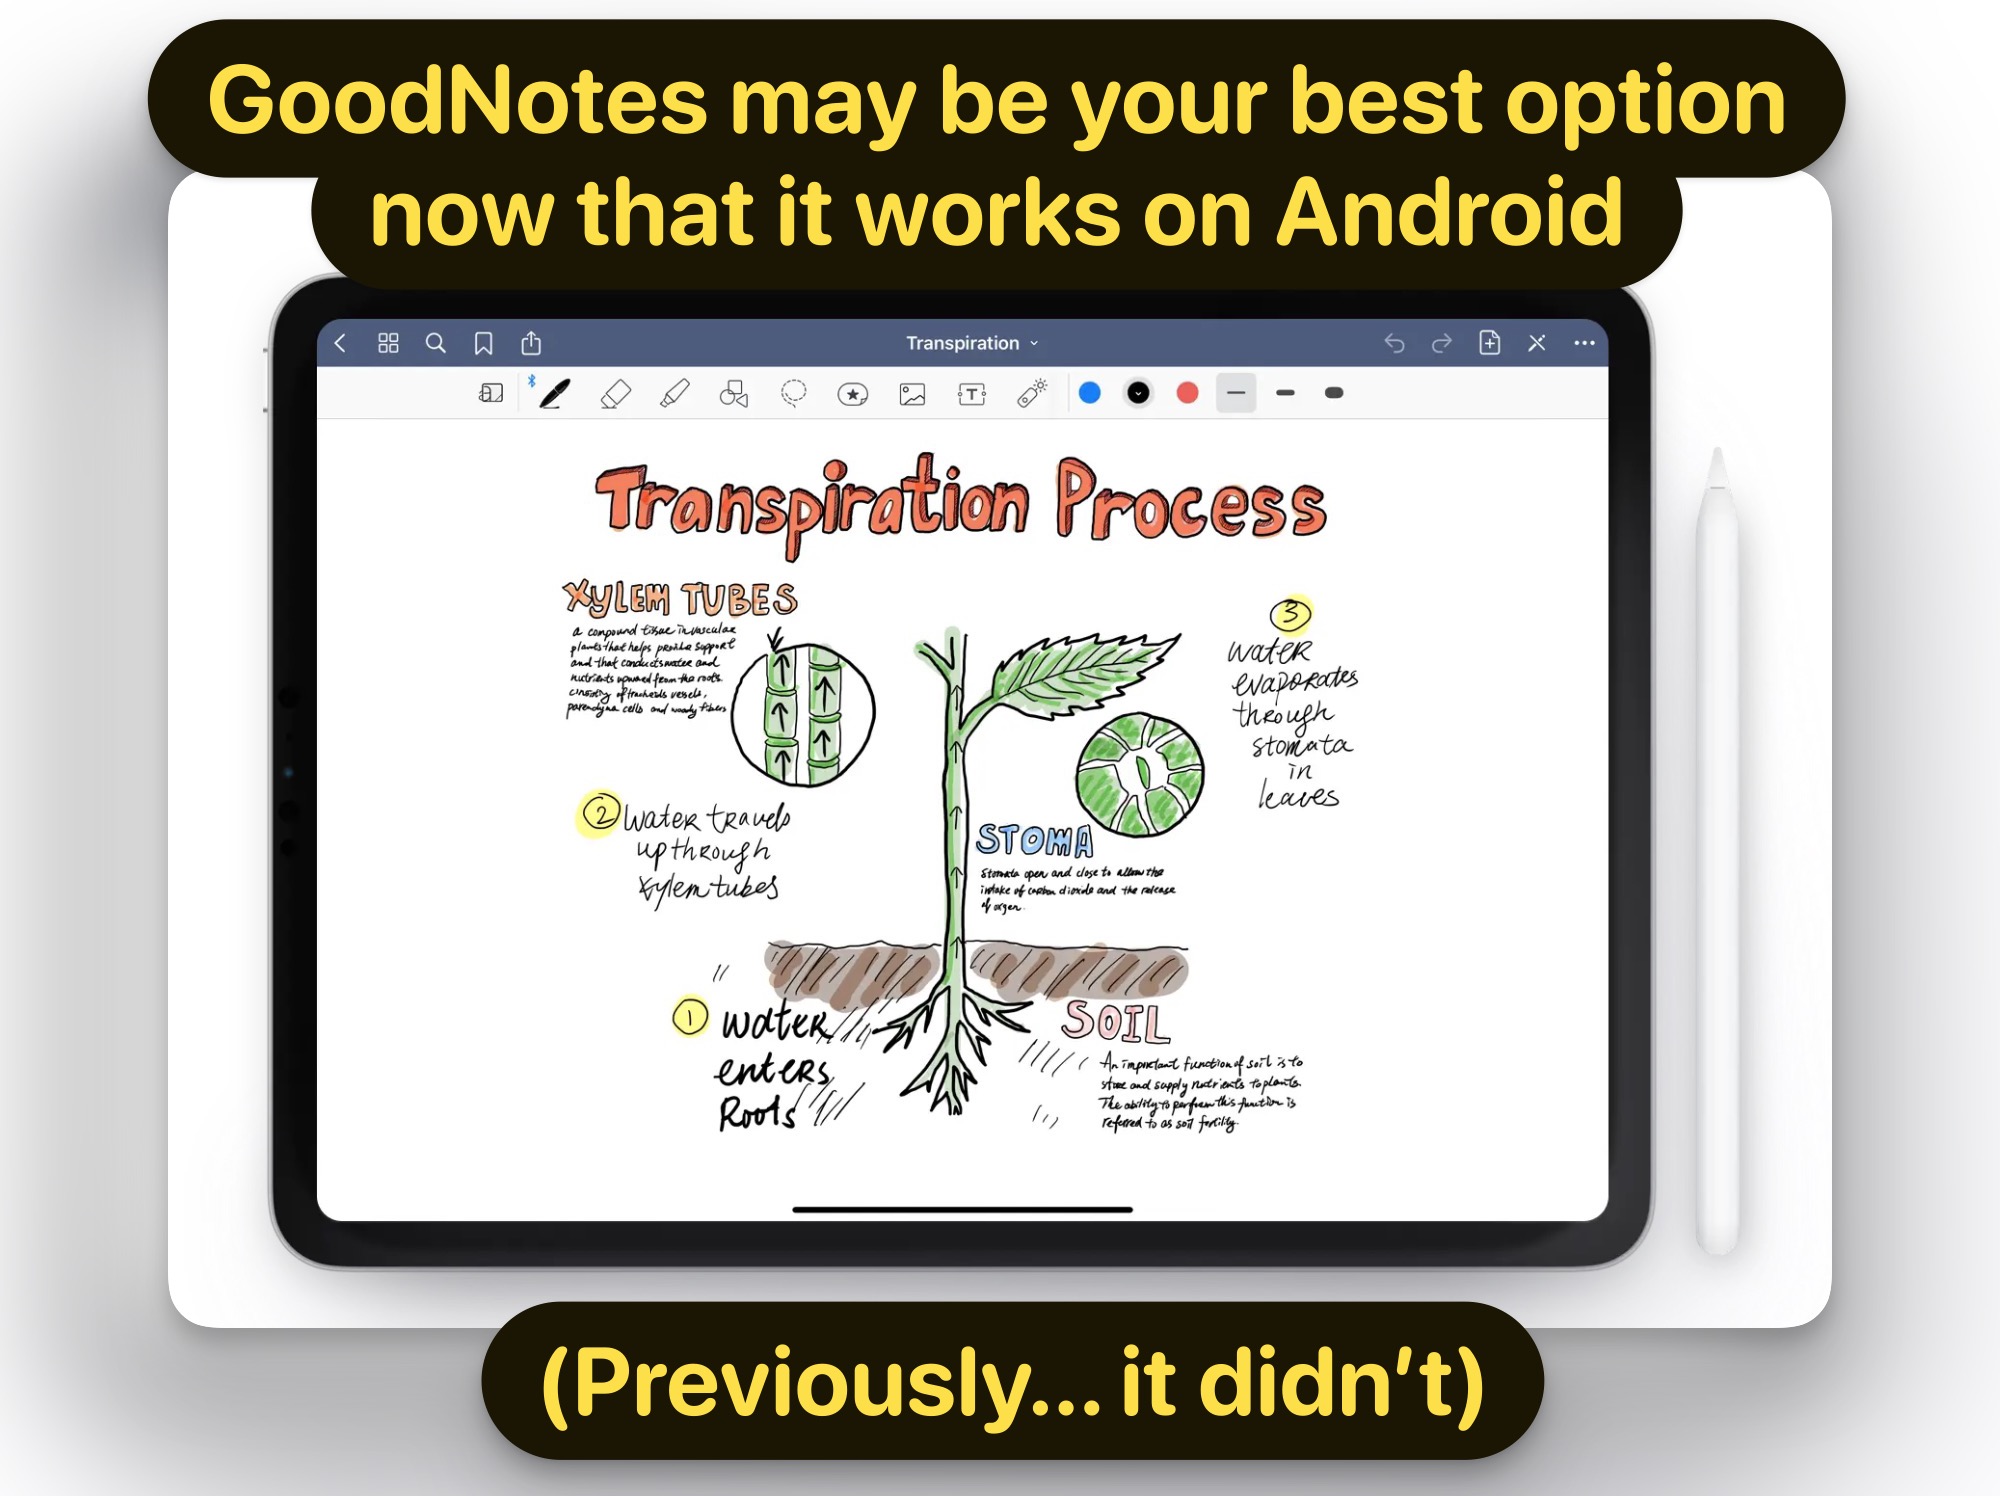 GoodNotes may be your best option now that it works on Android